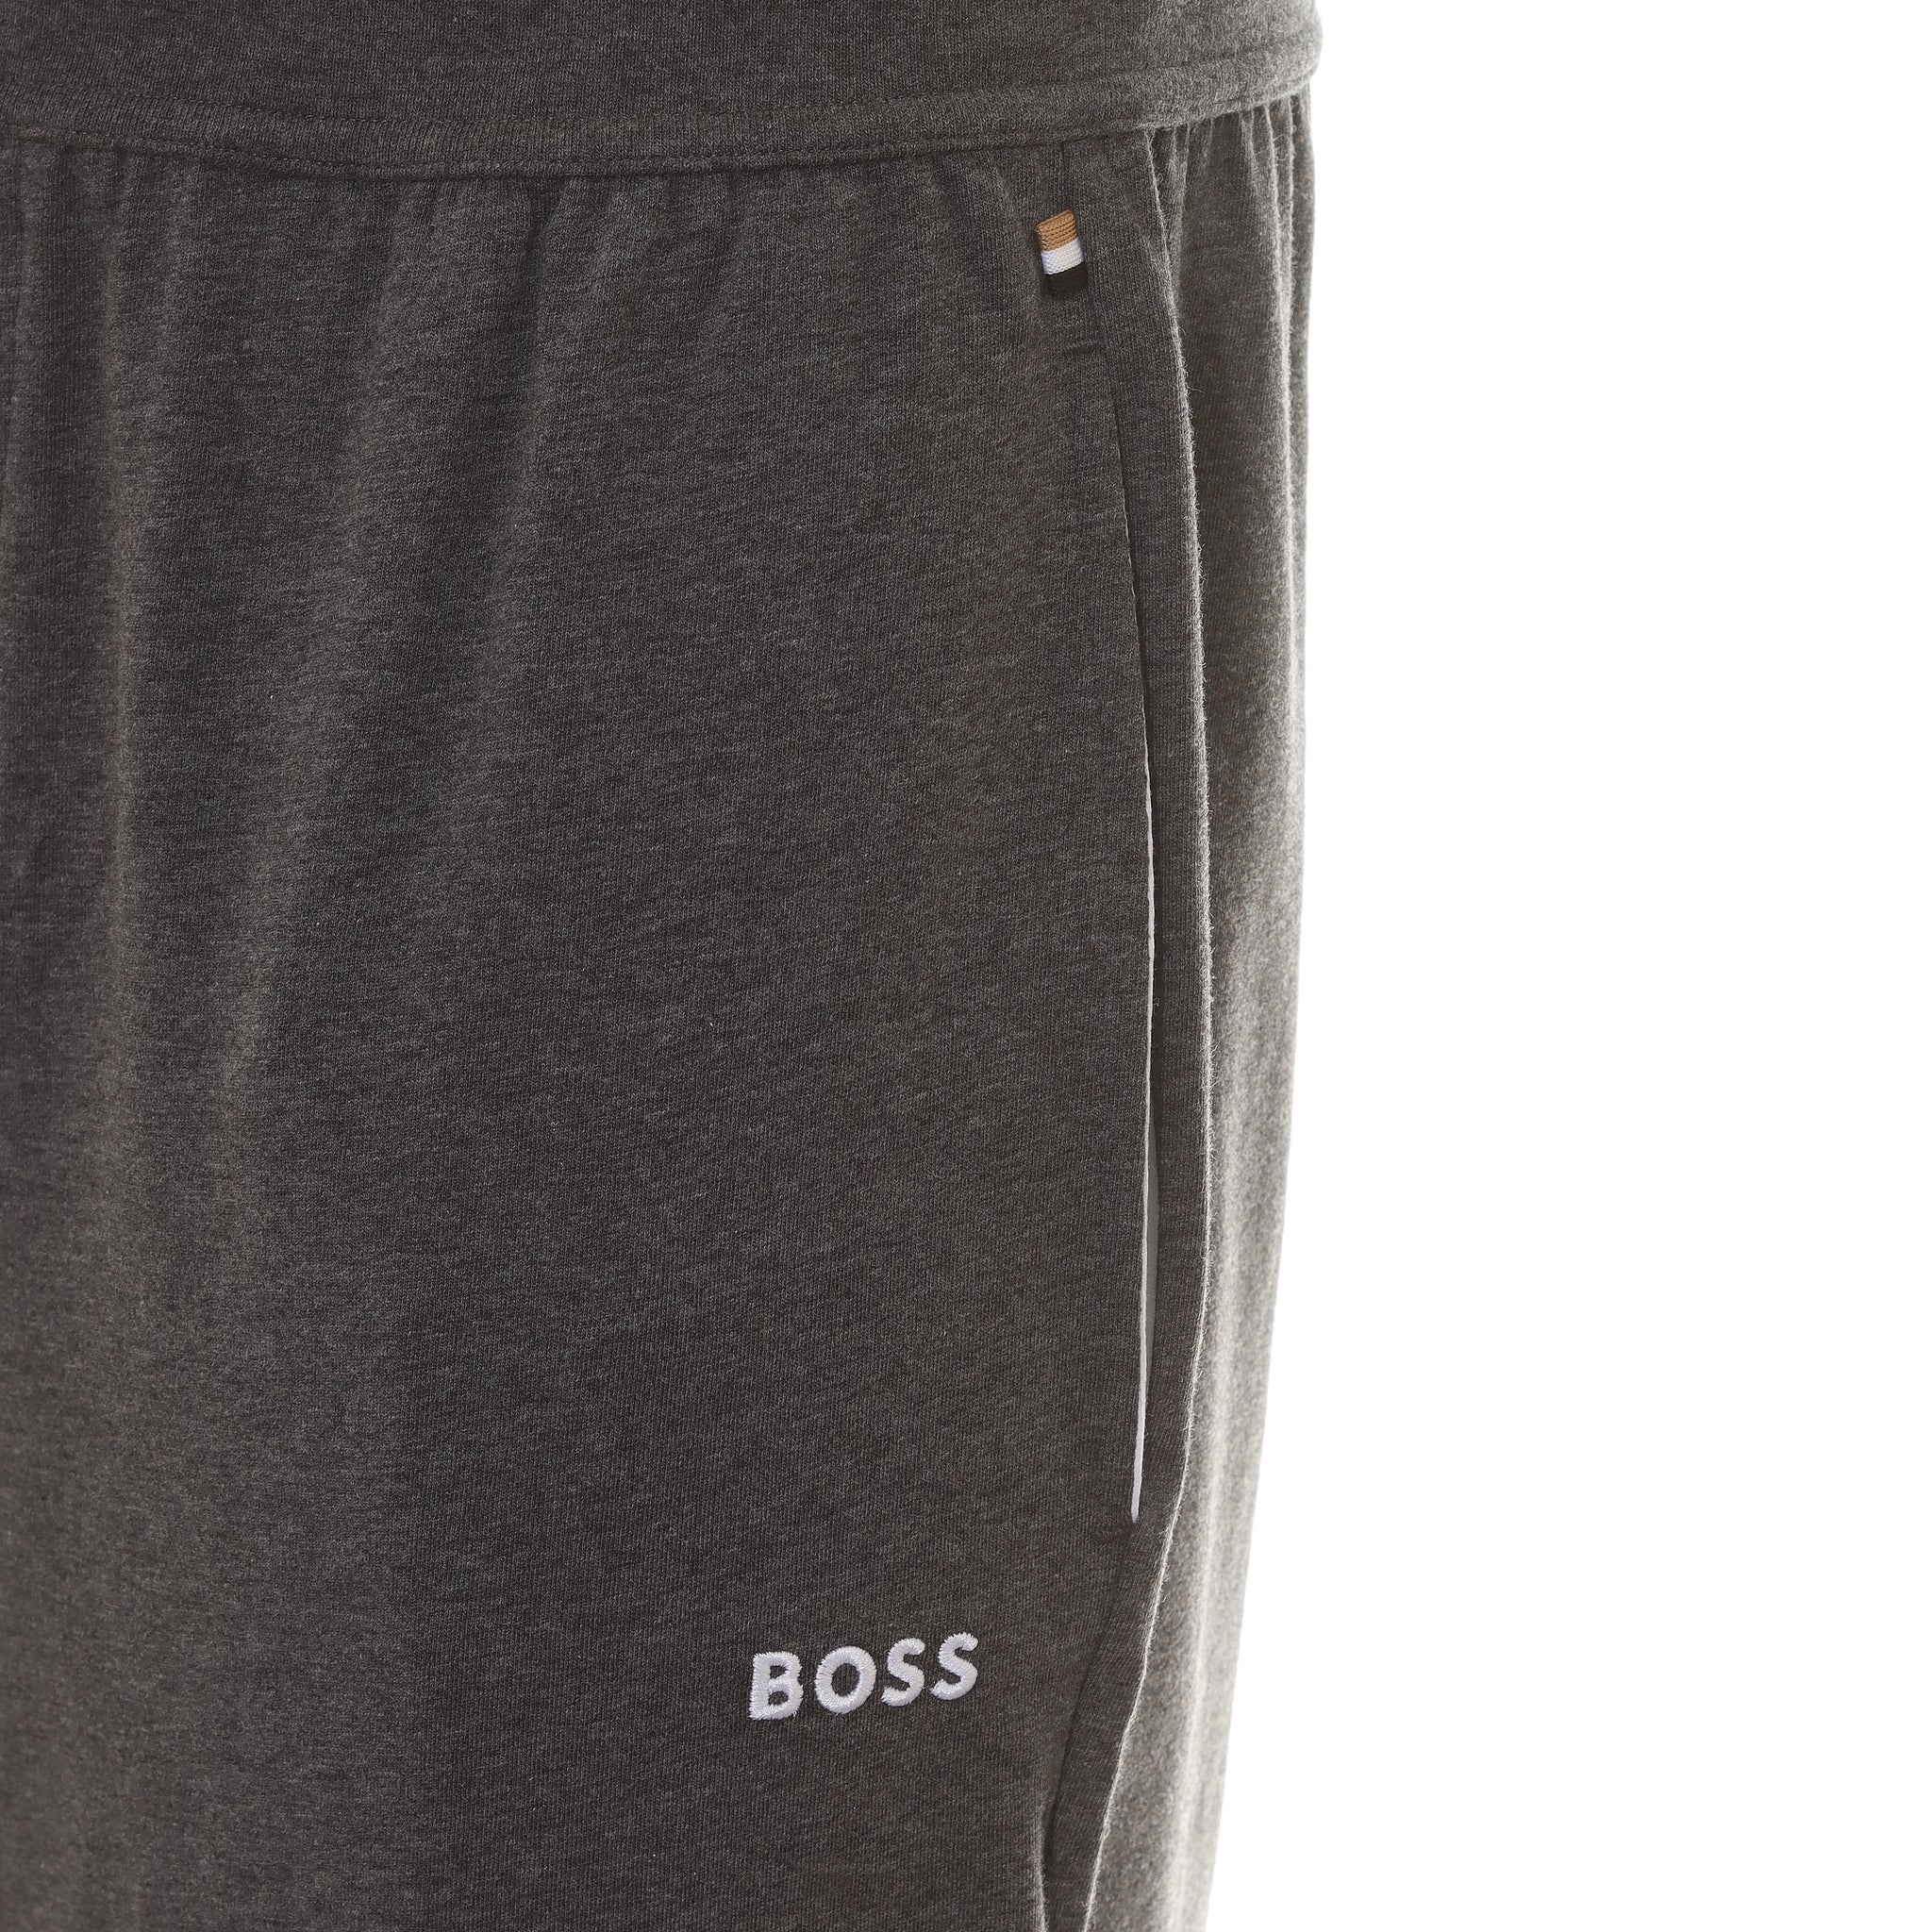 BOSS Mix & Match Pant 50473000 Charcoal 011 | Function18 | Restrictedgs